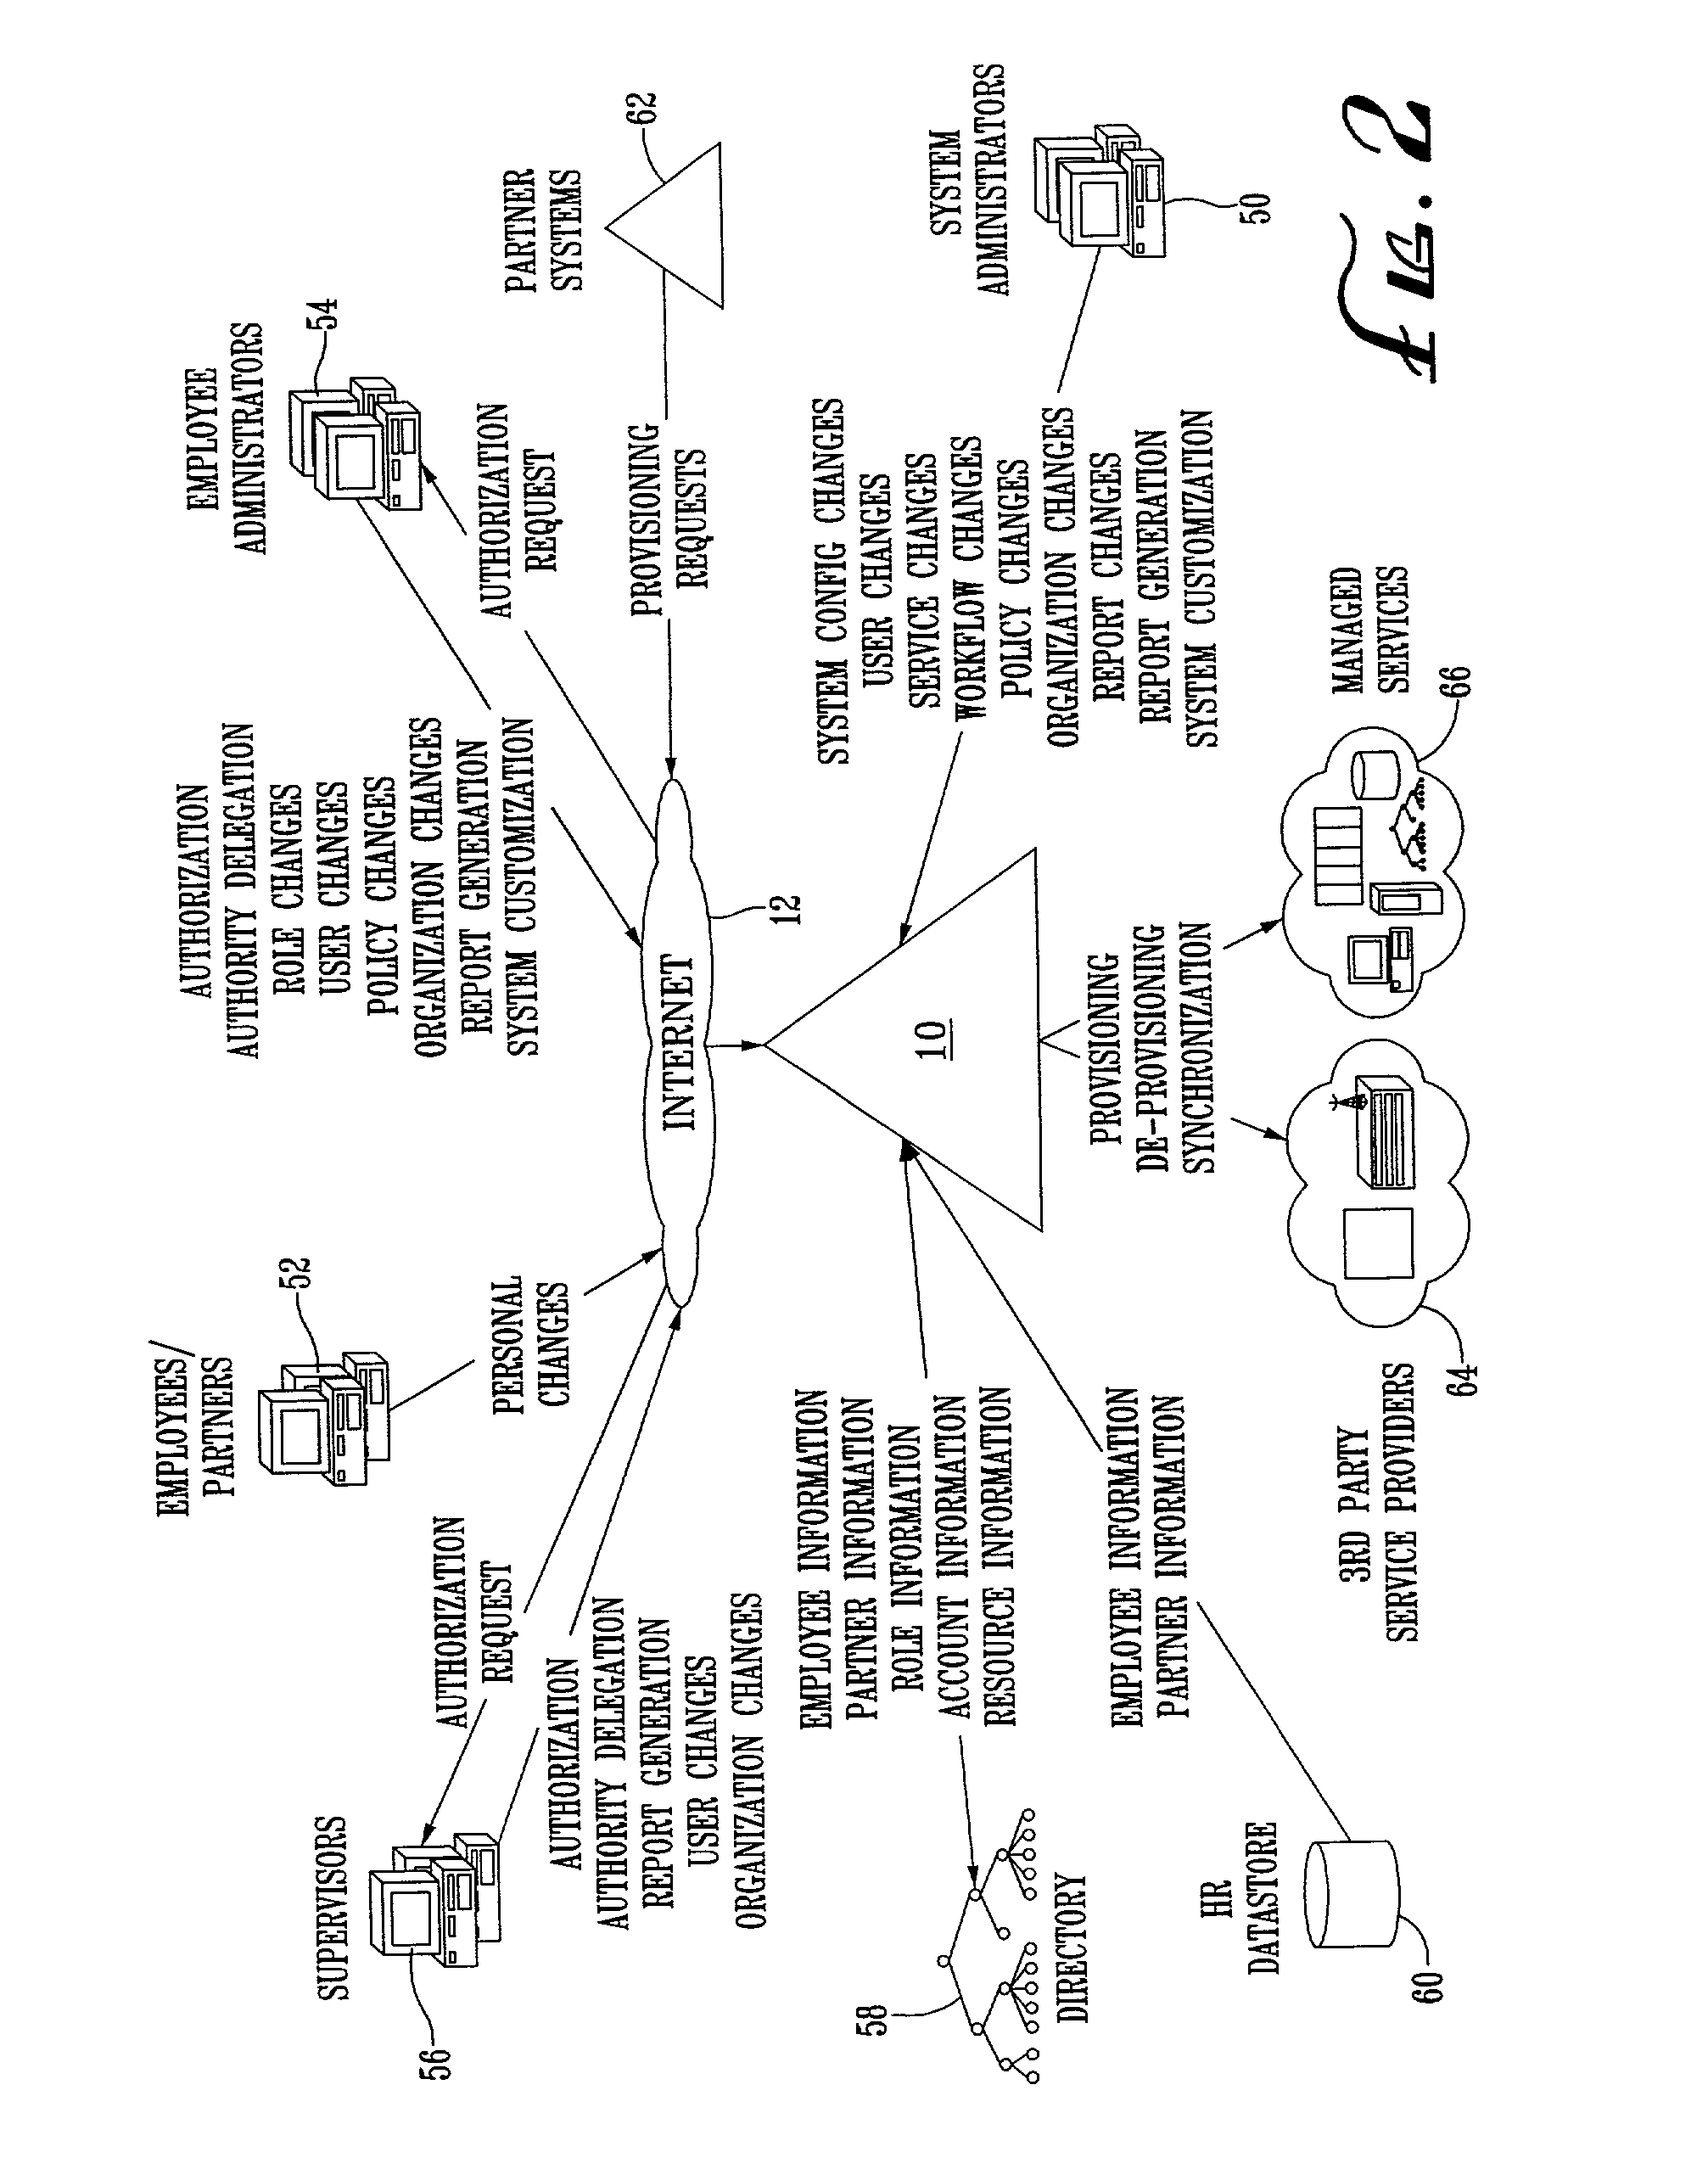 System and method for provisioning resources to users based on roles, organizational information, attributes and third-party information or authorizations